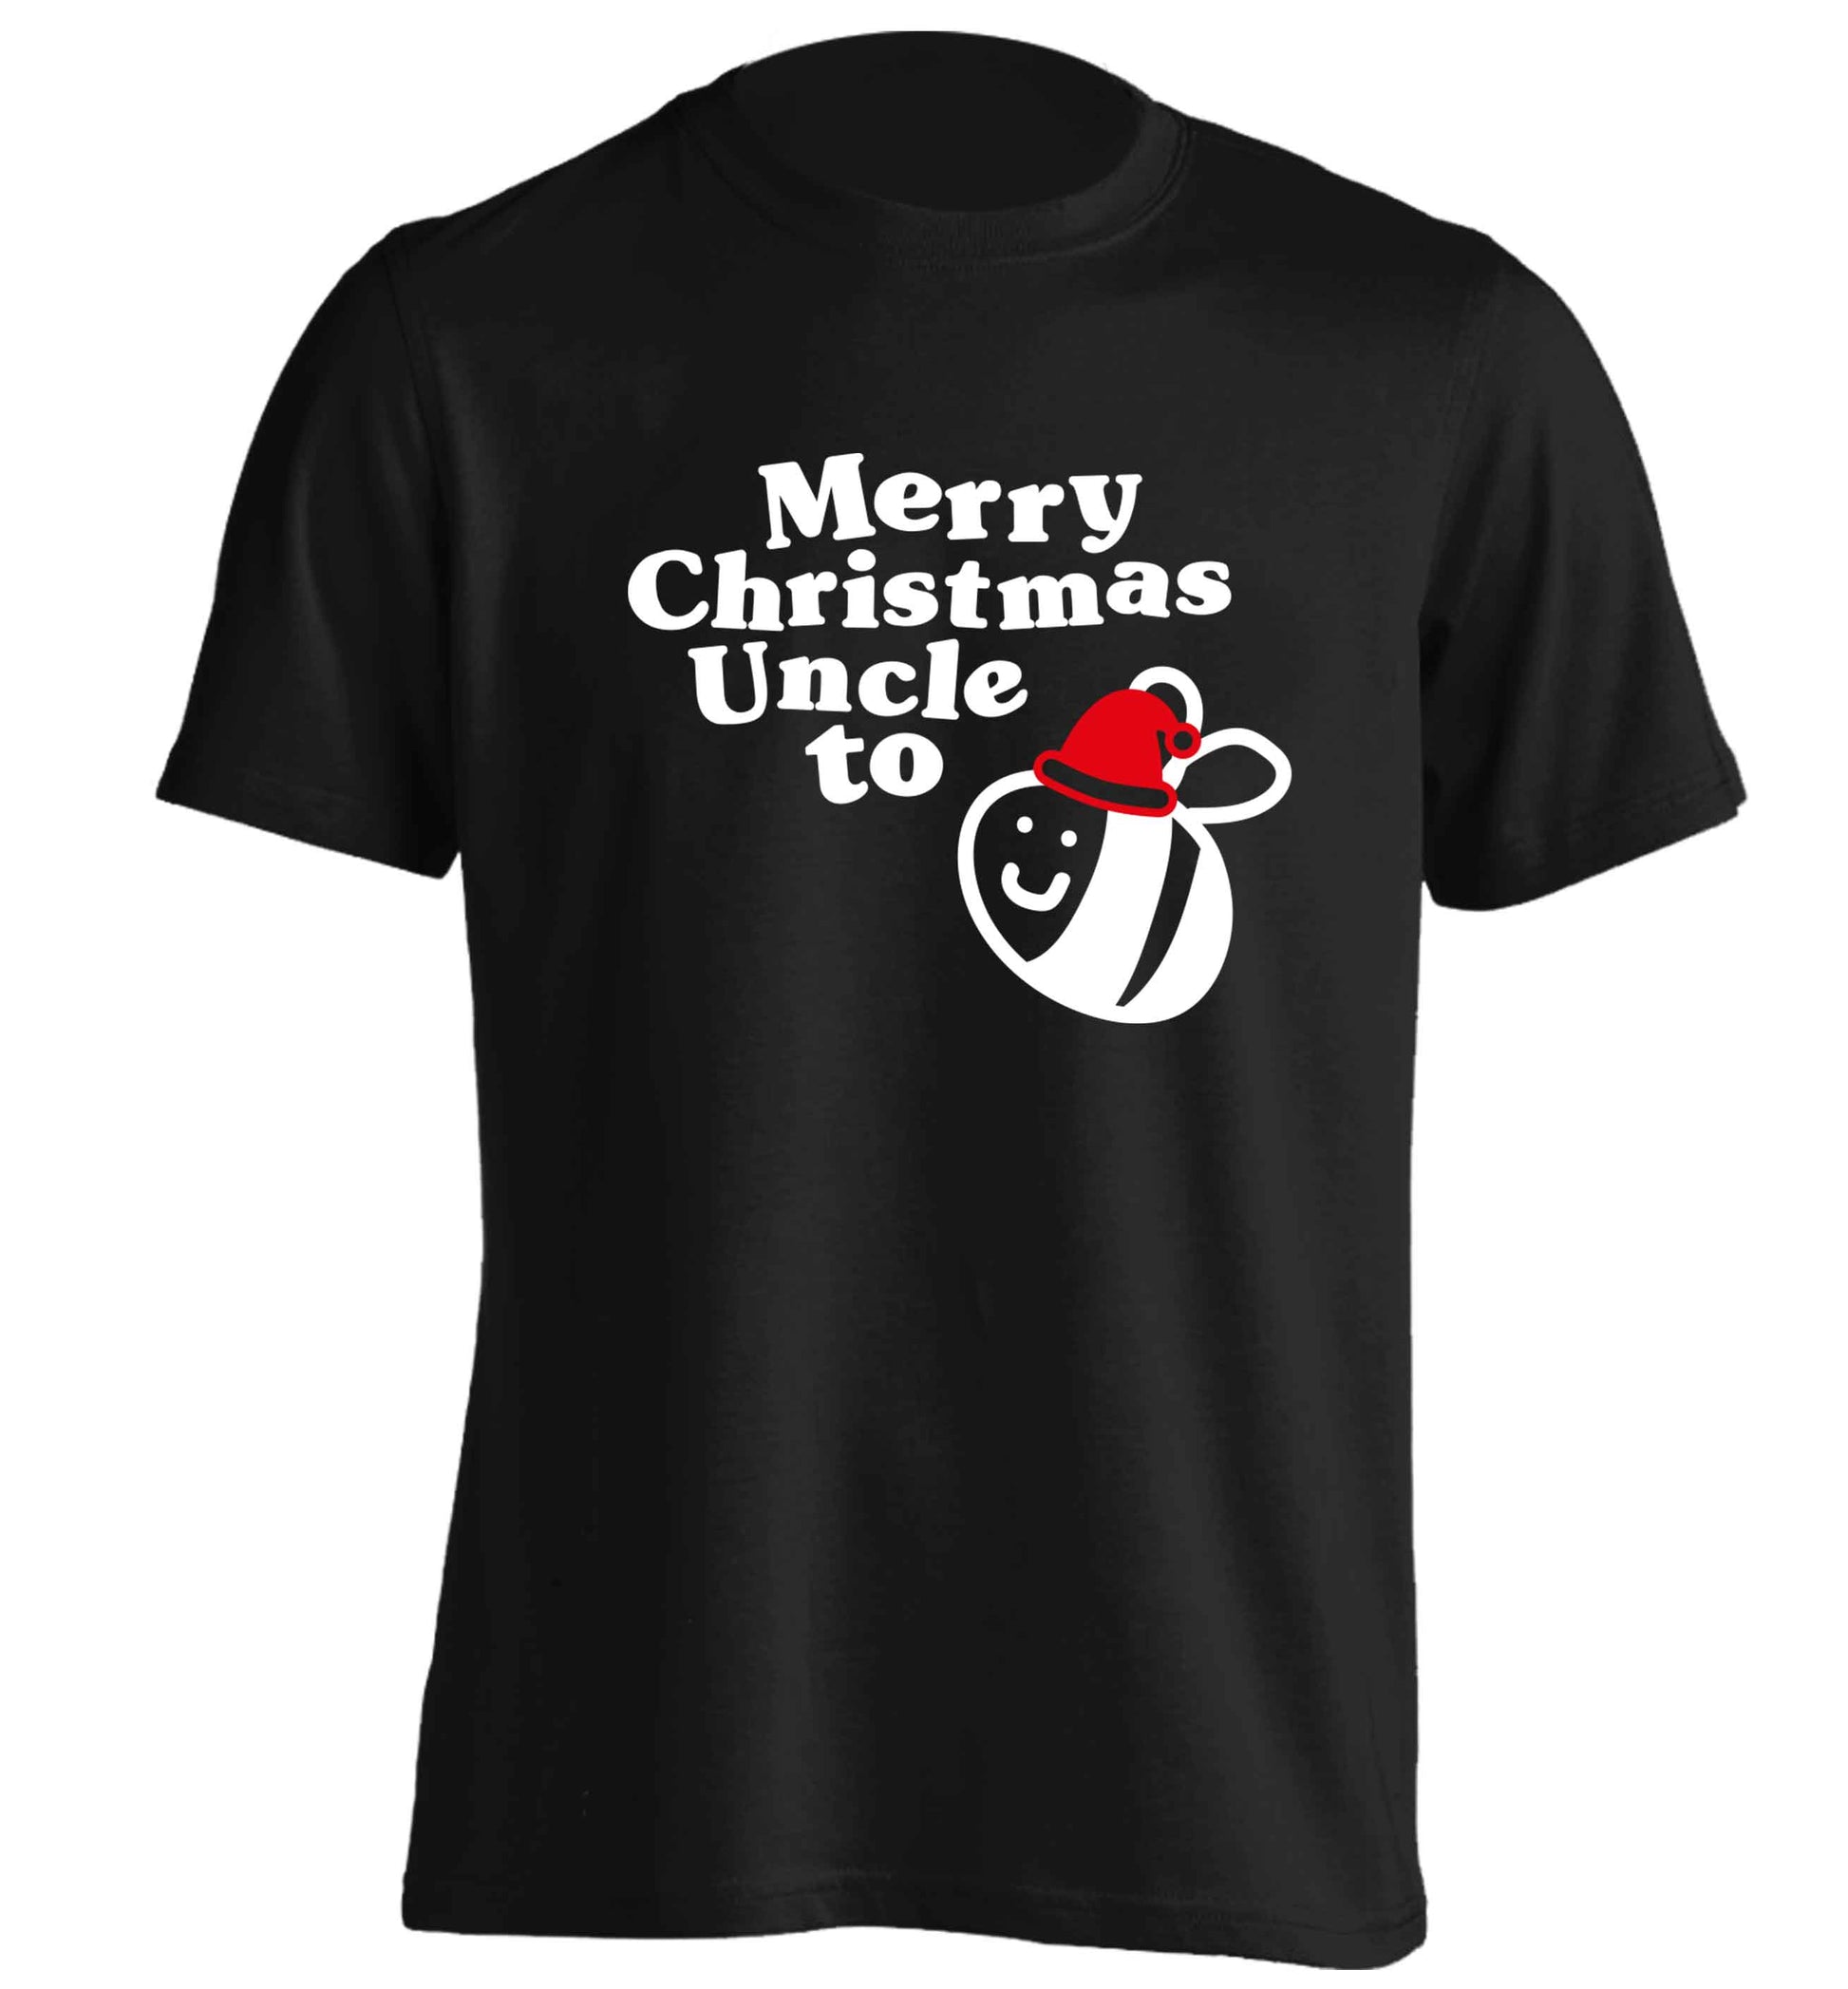 Merry Christmas uncle to be adults unisex black Tshirt 2XL